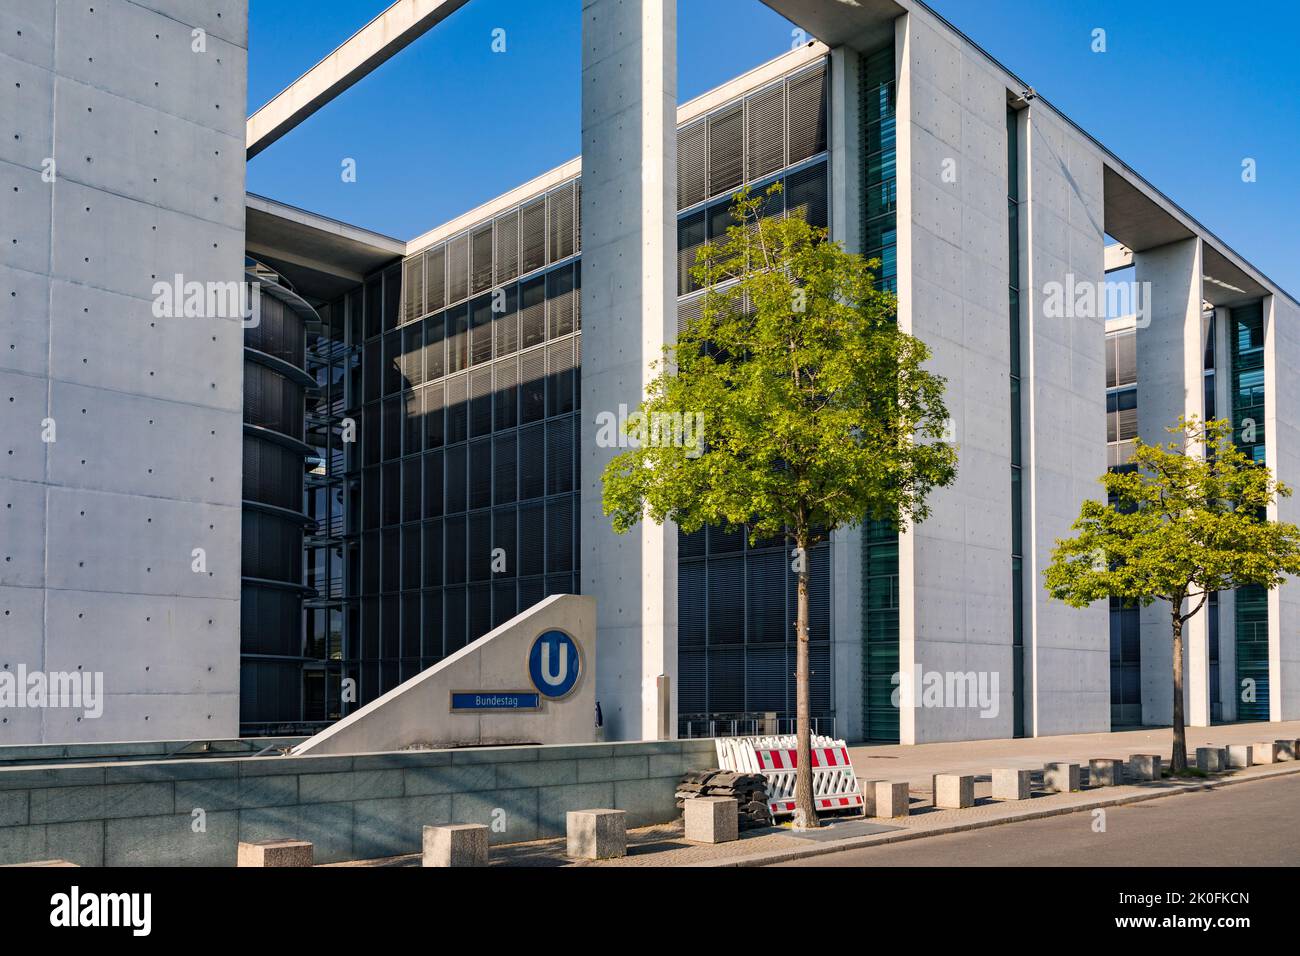 The German Parliament Bundestag with subway stop in Berlin, Germany Stock Photo